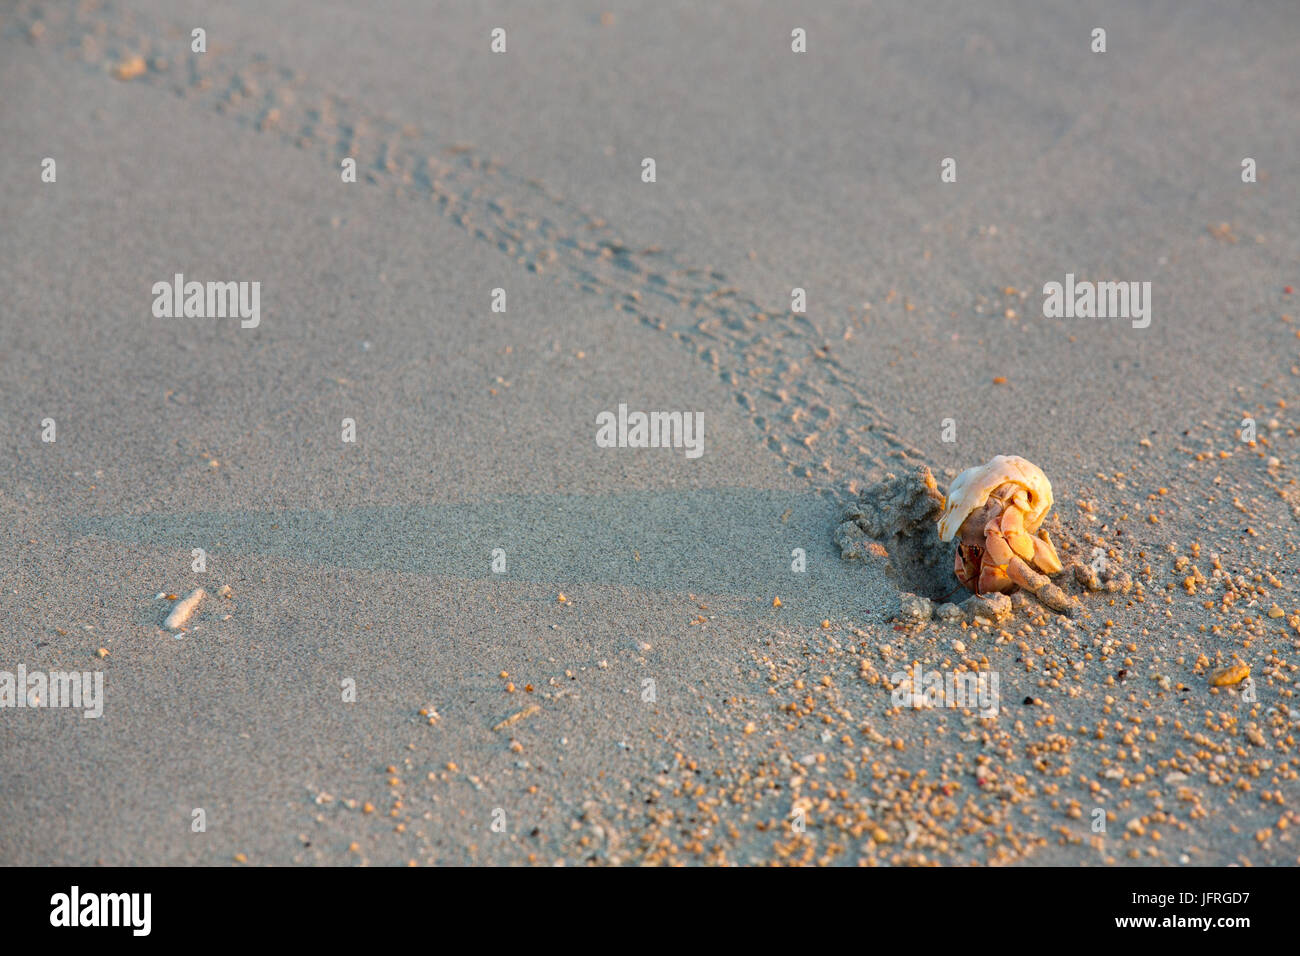 Hermit crab taking a stroll in the sunset on the beach Stock Photo